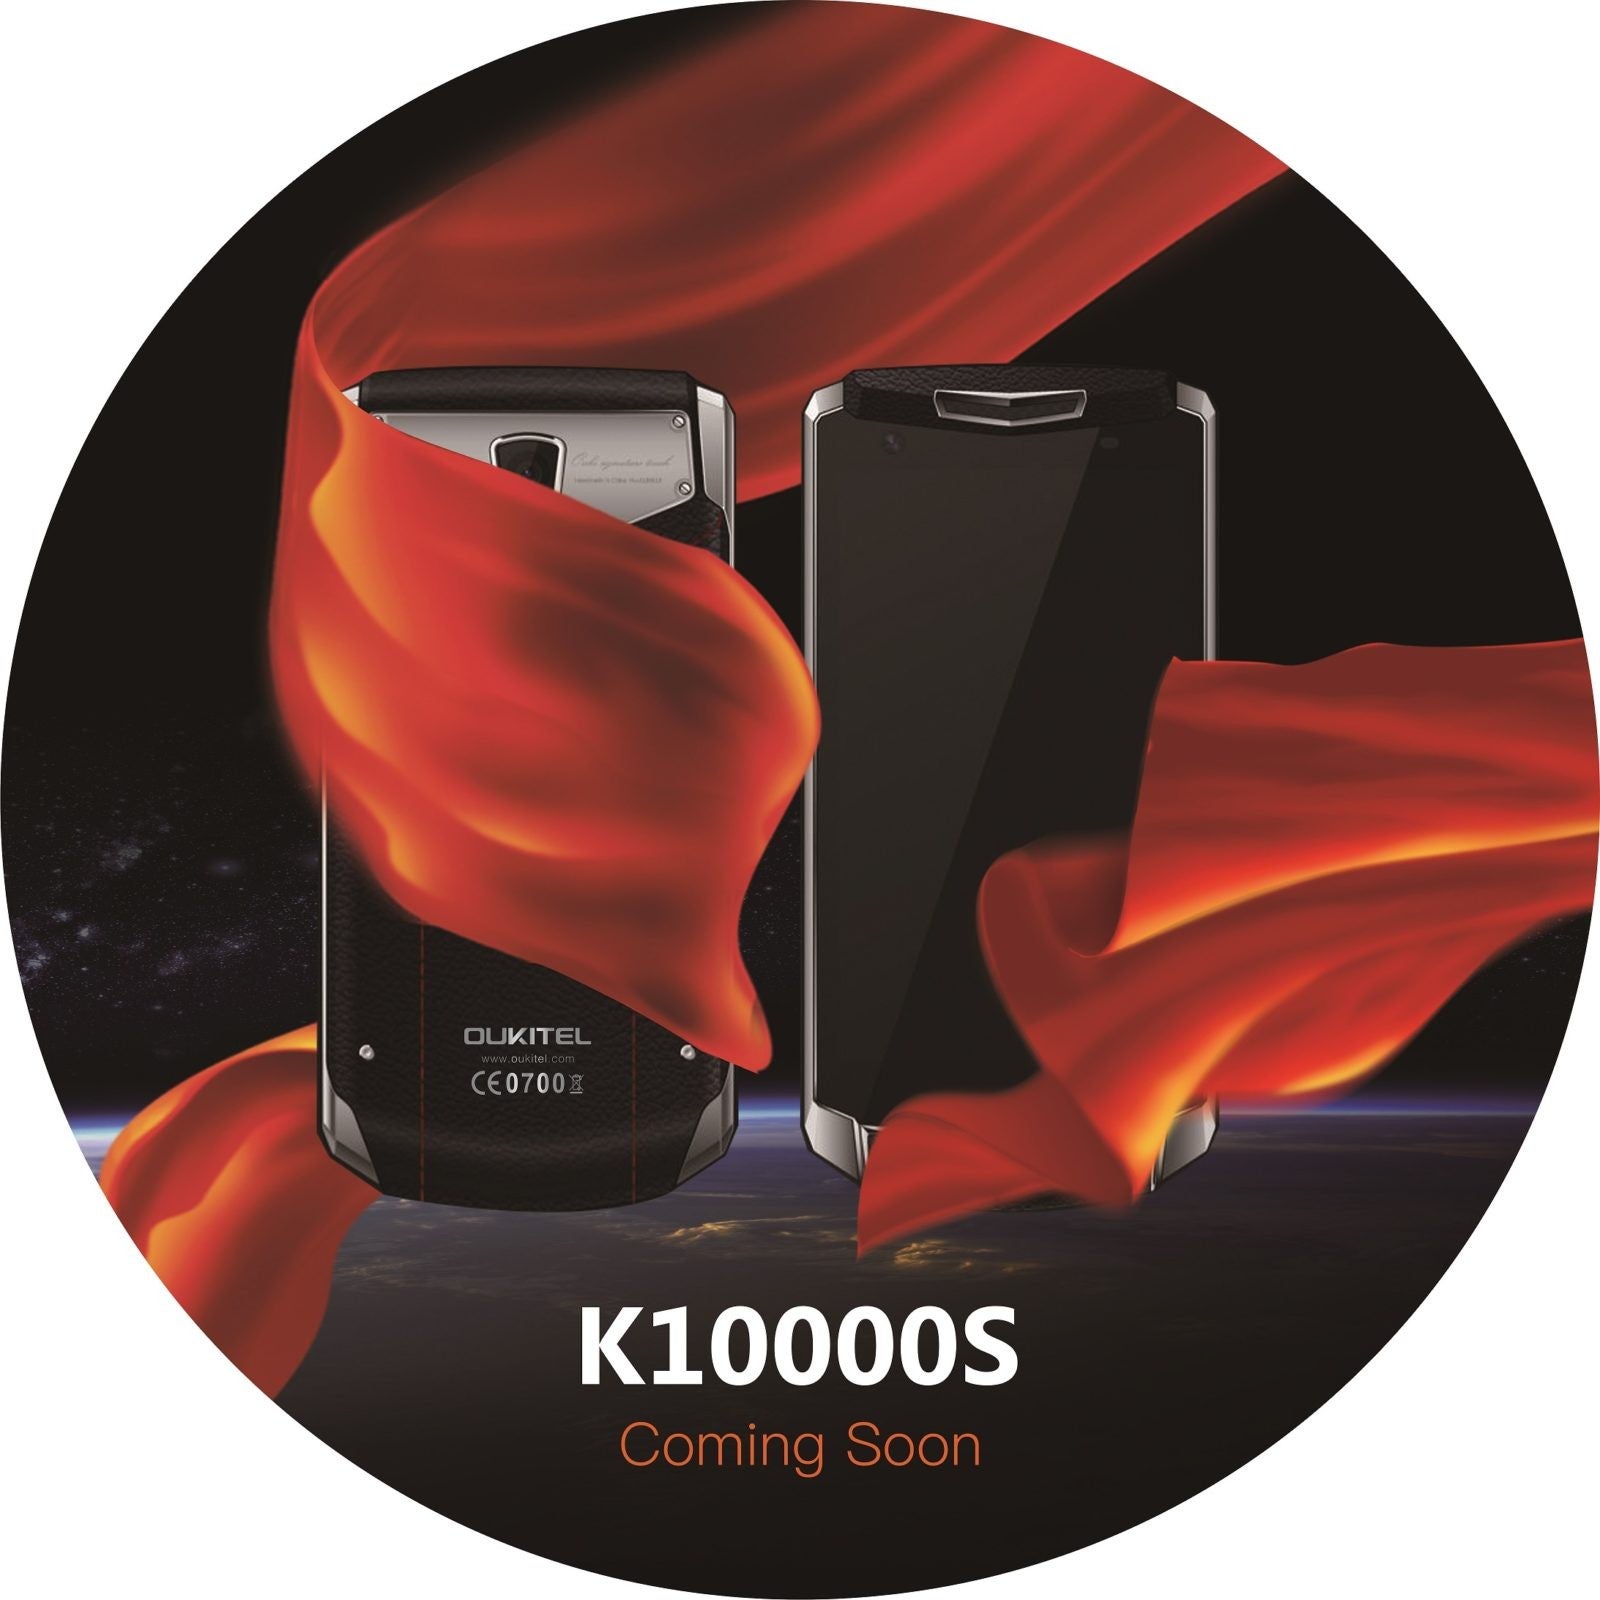 Oukitel to launch K10000S smartphone with 10,000 mAh battery